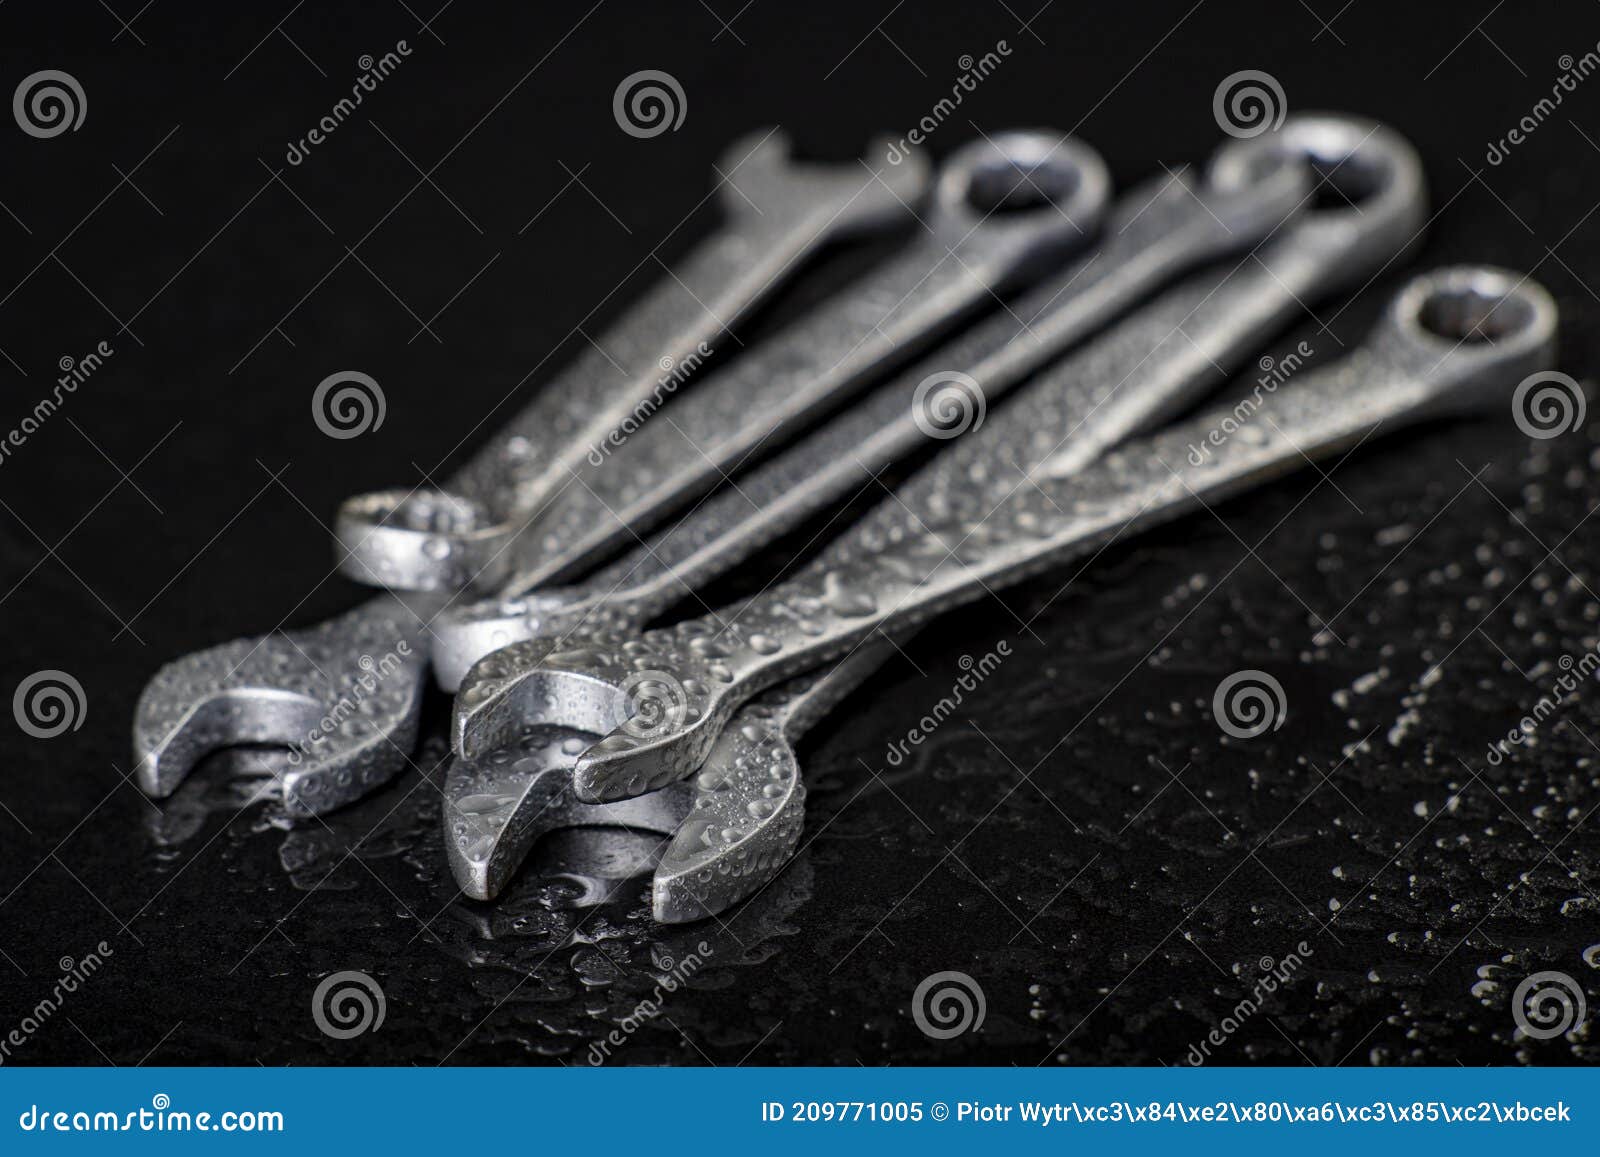 water drops on workshop wrenches. wet tools used in a machine shop